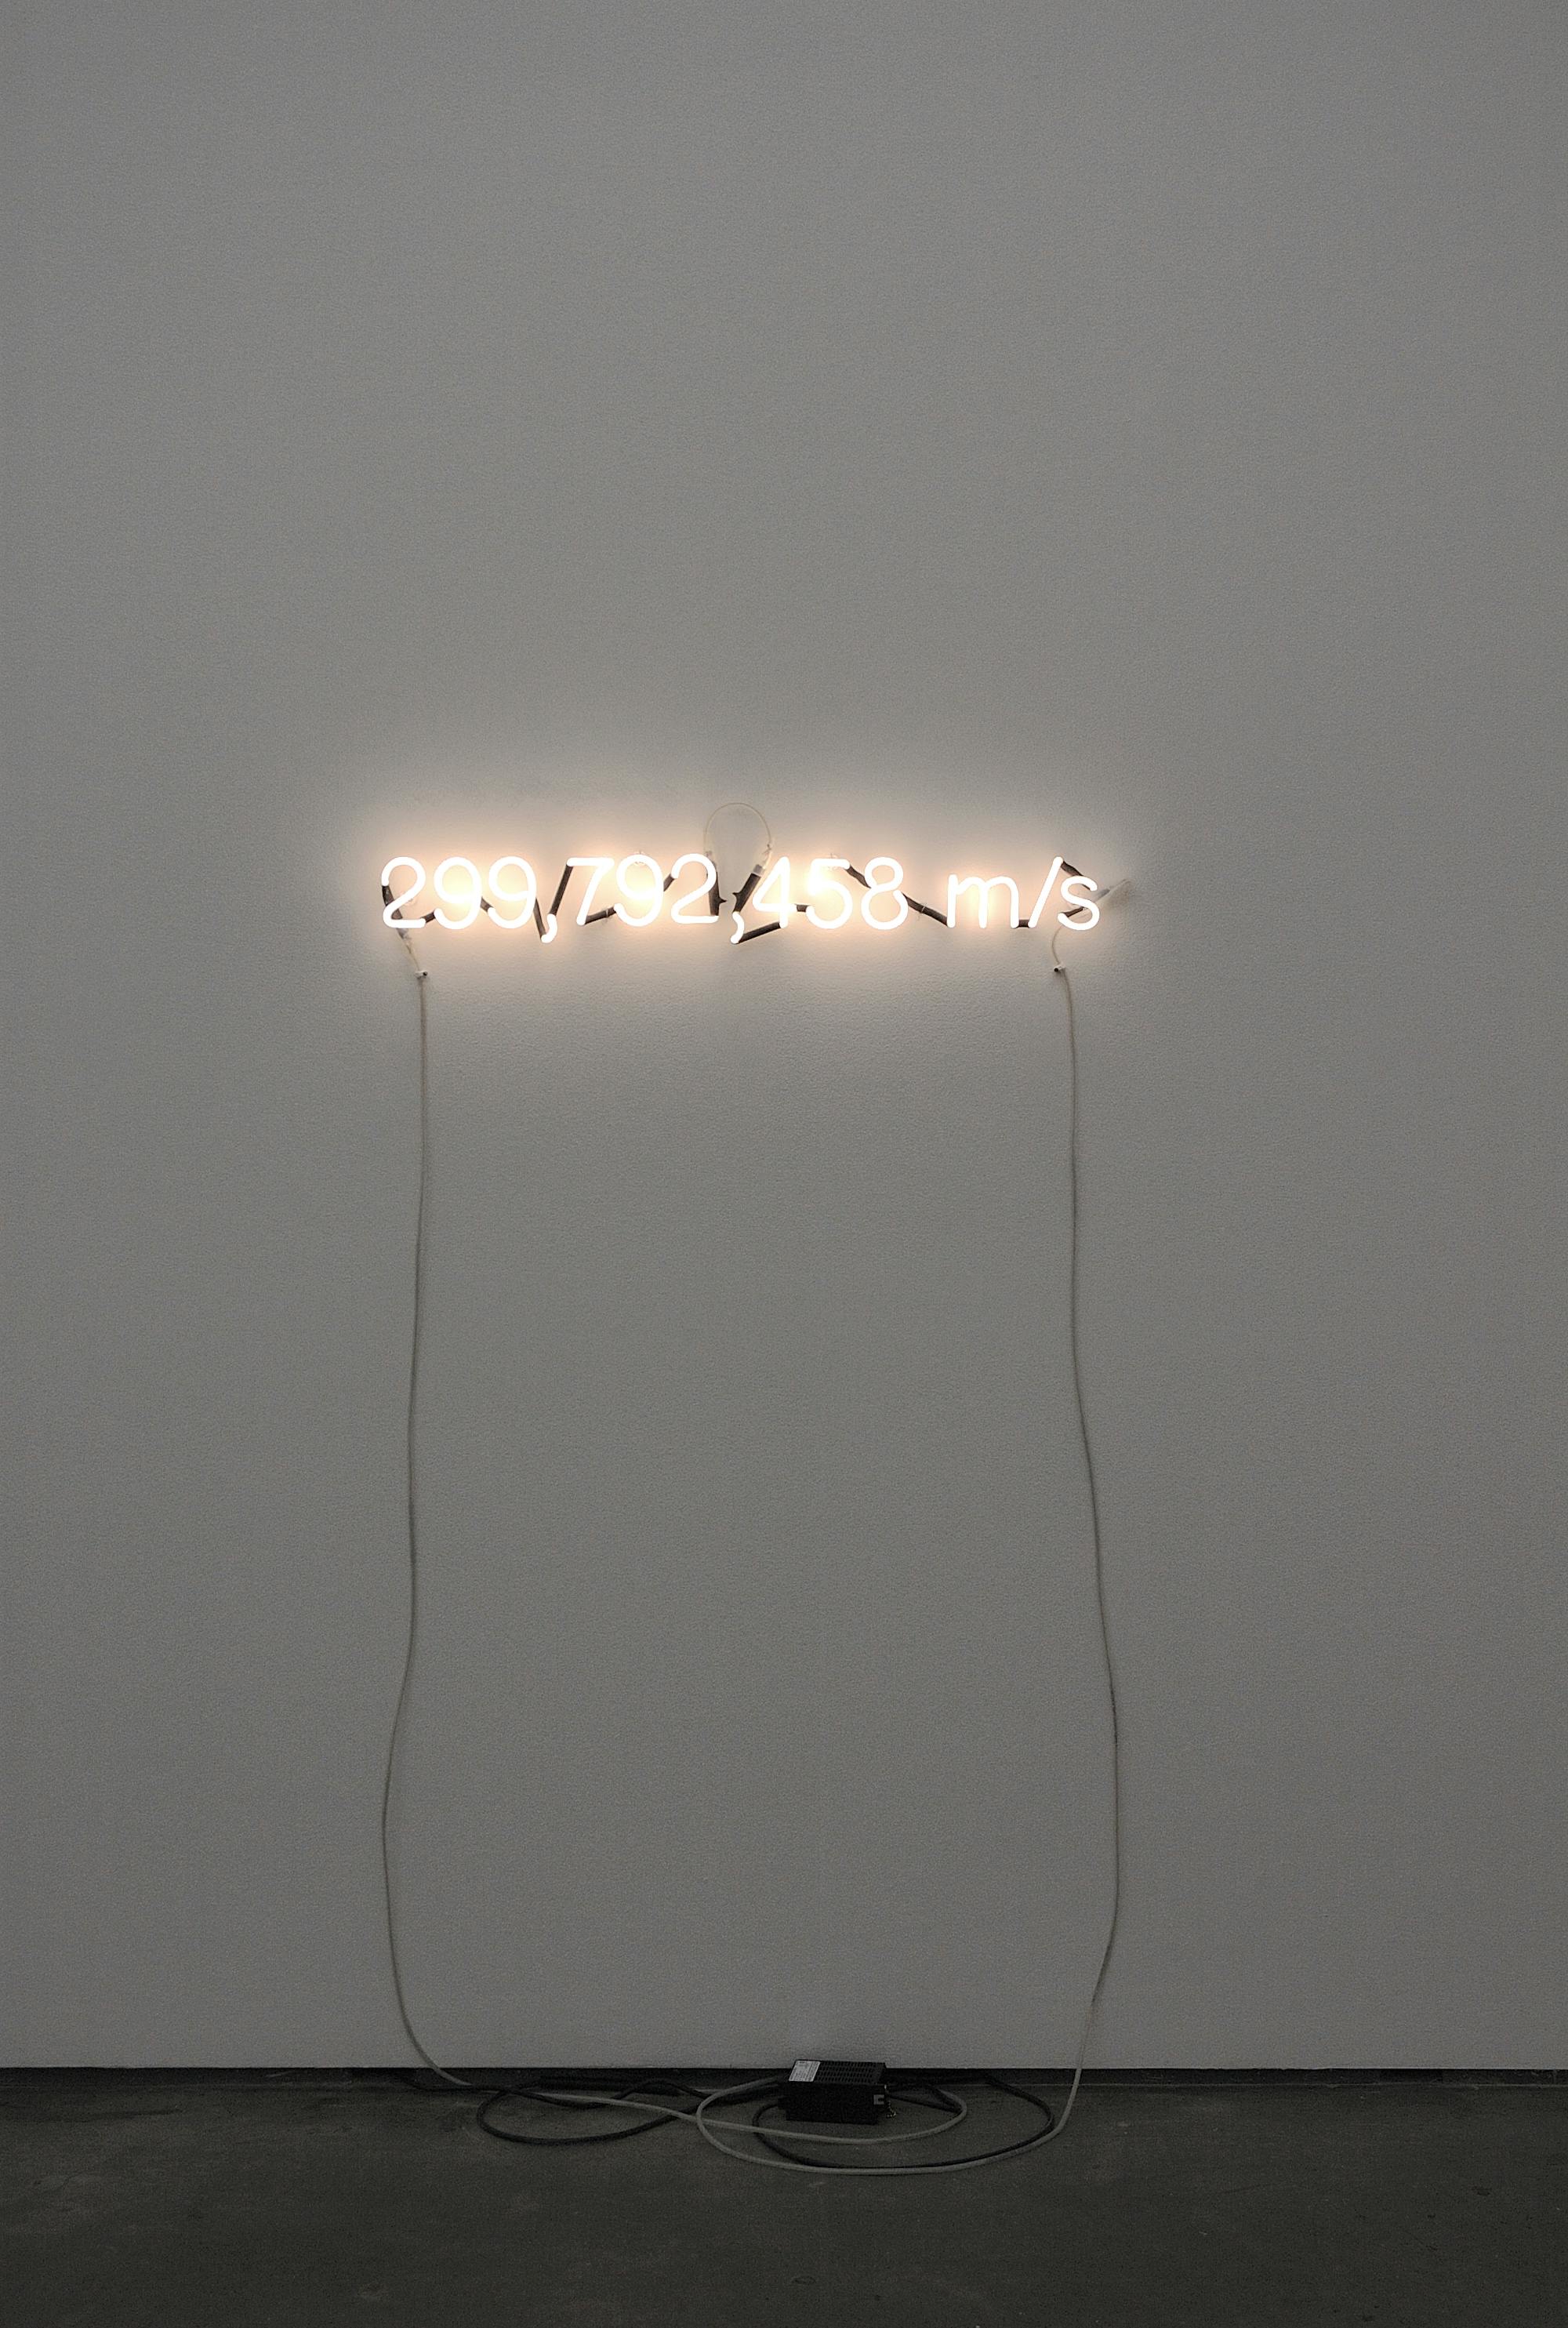 A white neon sign is attached to a white wall. It is attached some feet above the floor. The sign reads “299,792,458 m/s.” White tubes are hanging from both ends of the sign.